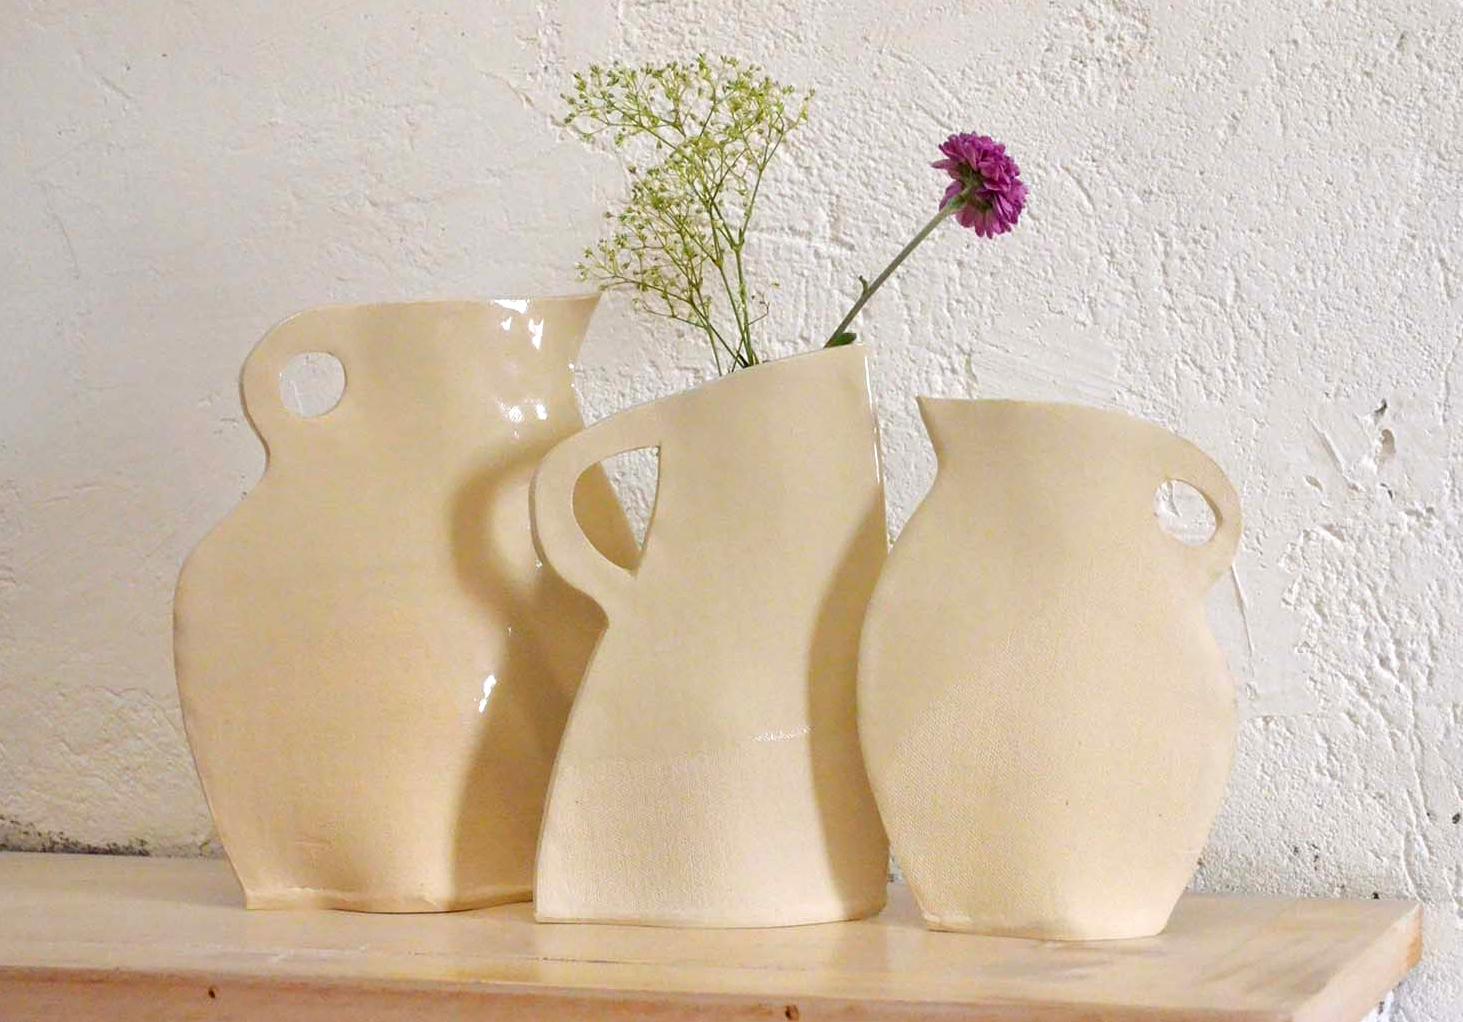 This set of three flat vases by Alison Owen is made through Owen's skillful hand-building technique, utilizing thin slabs of white stoneware clay, partially dipped in clear glaze to create a subtle textural and surface design. The canvas texture of